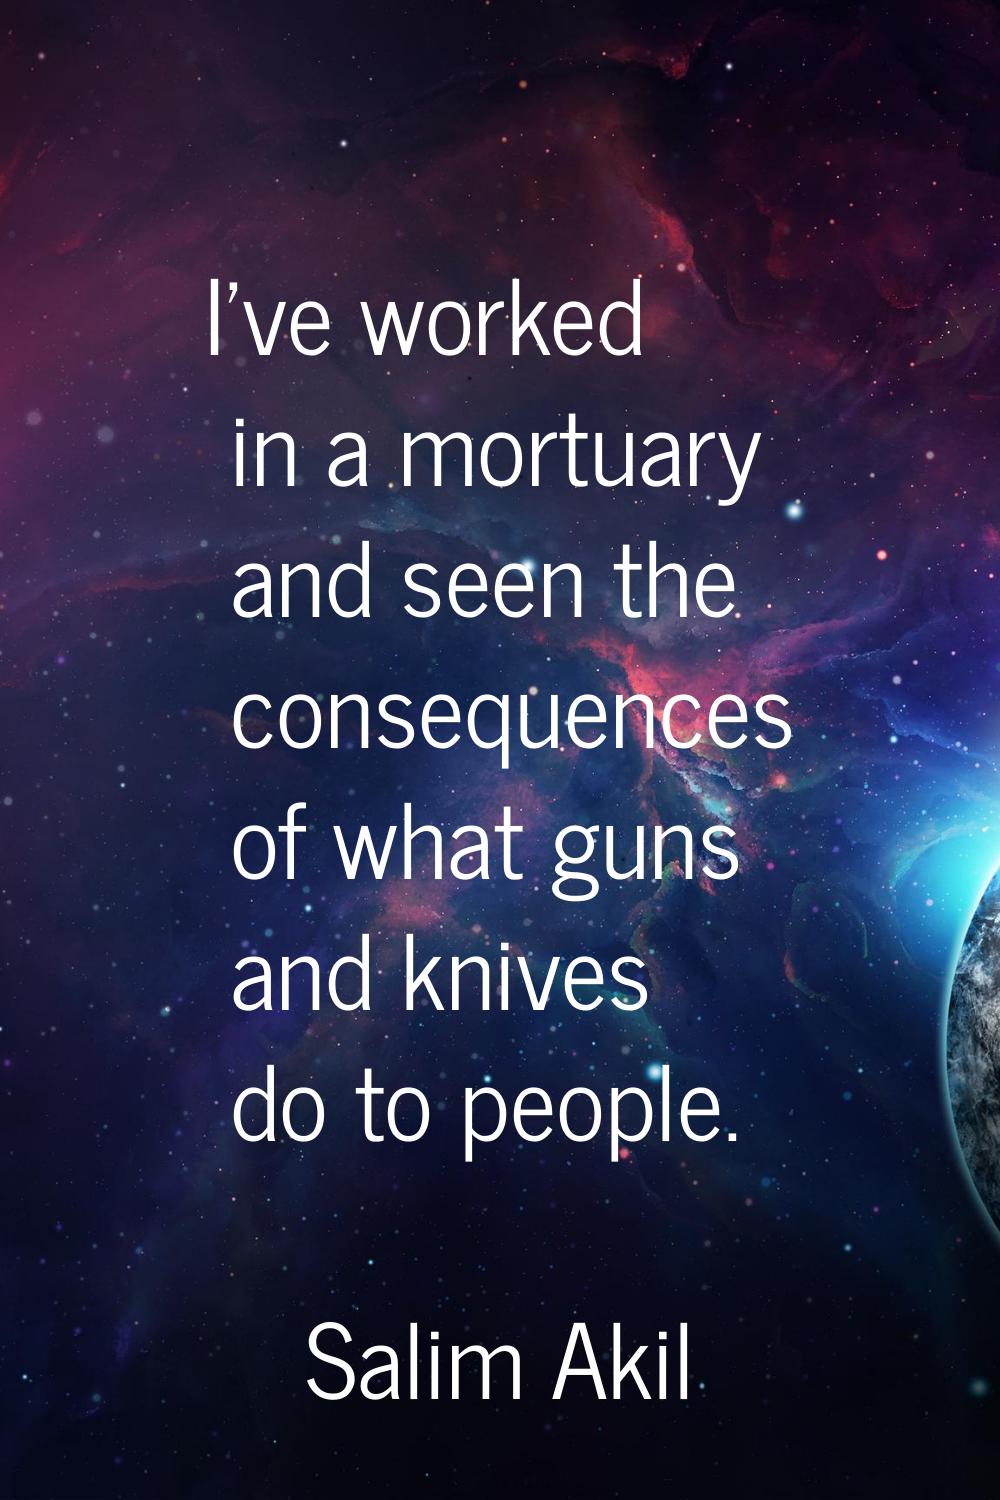 I've worked in a mortuary and seen the consequences of what guns and knives do to people.